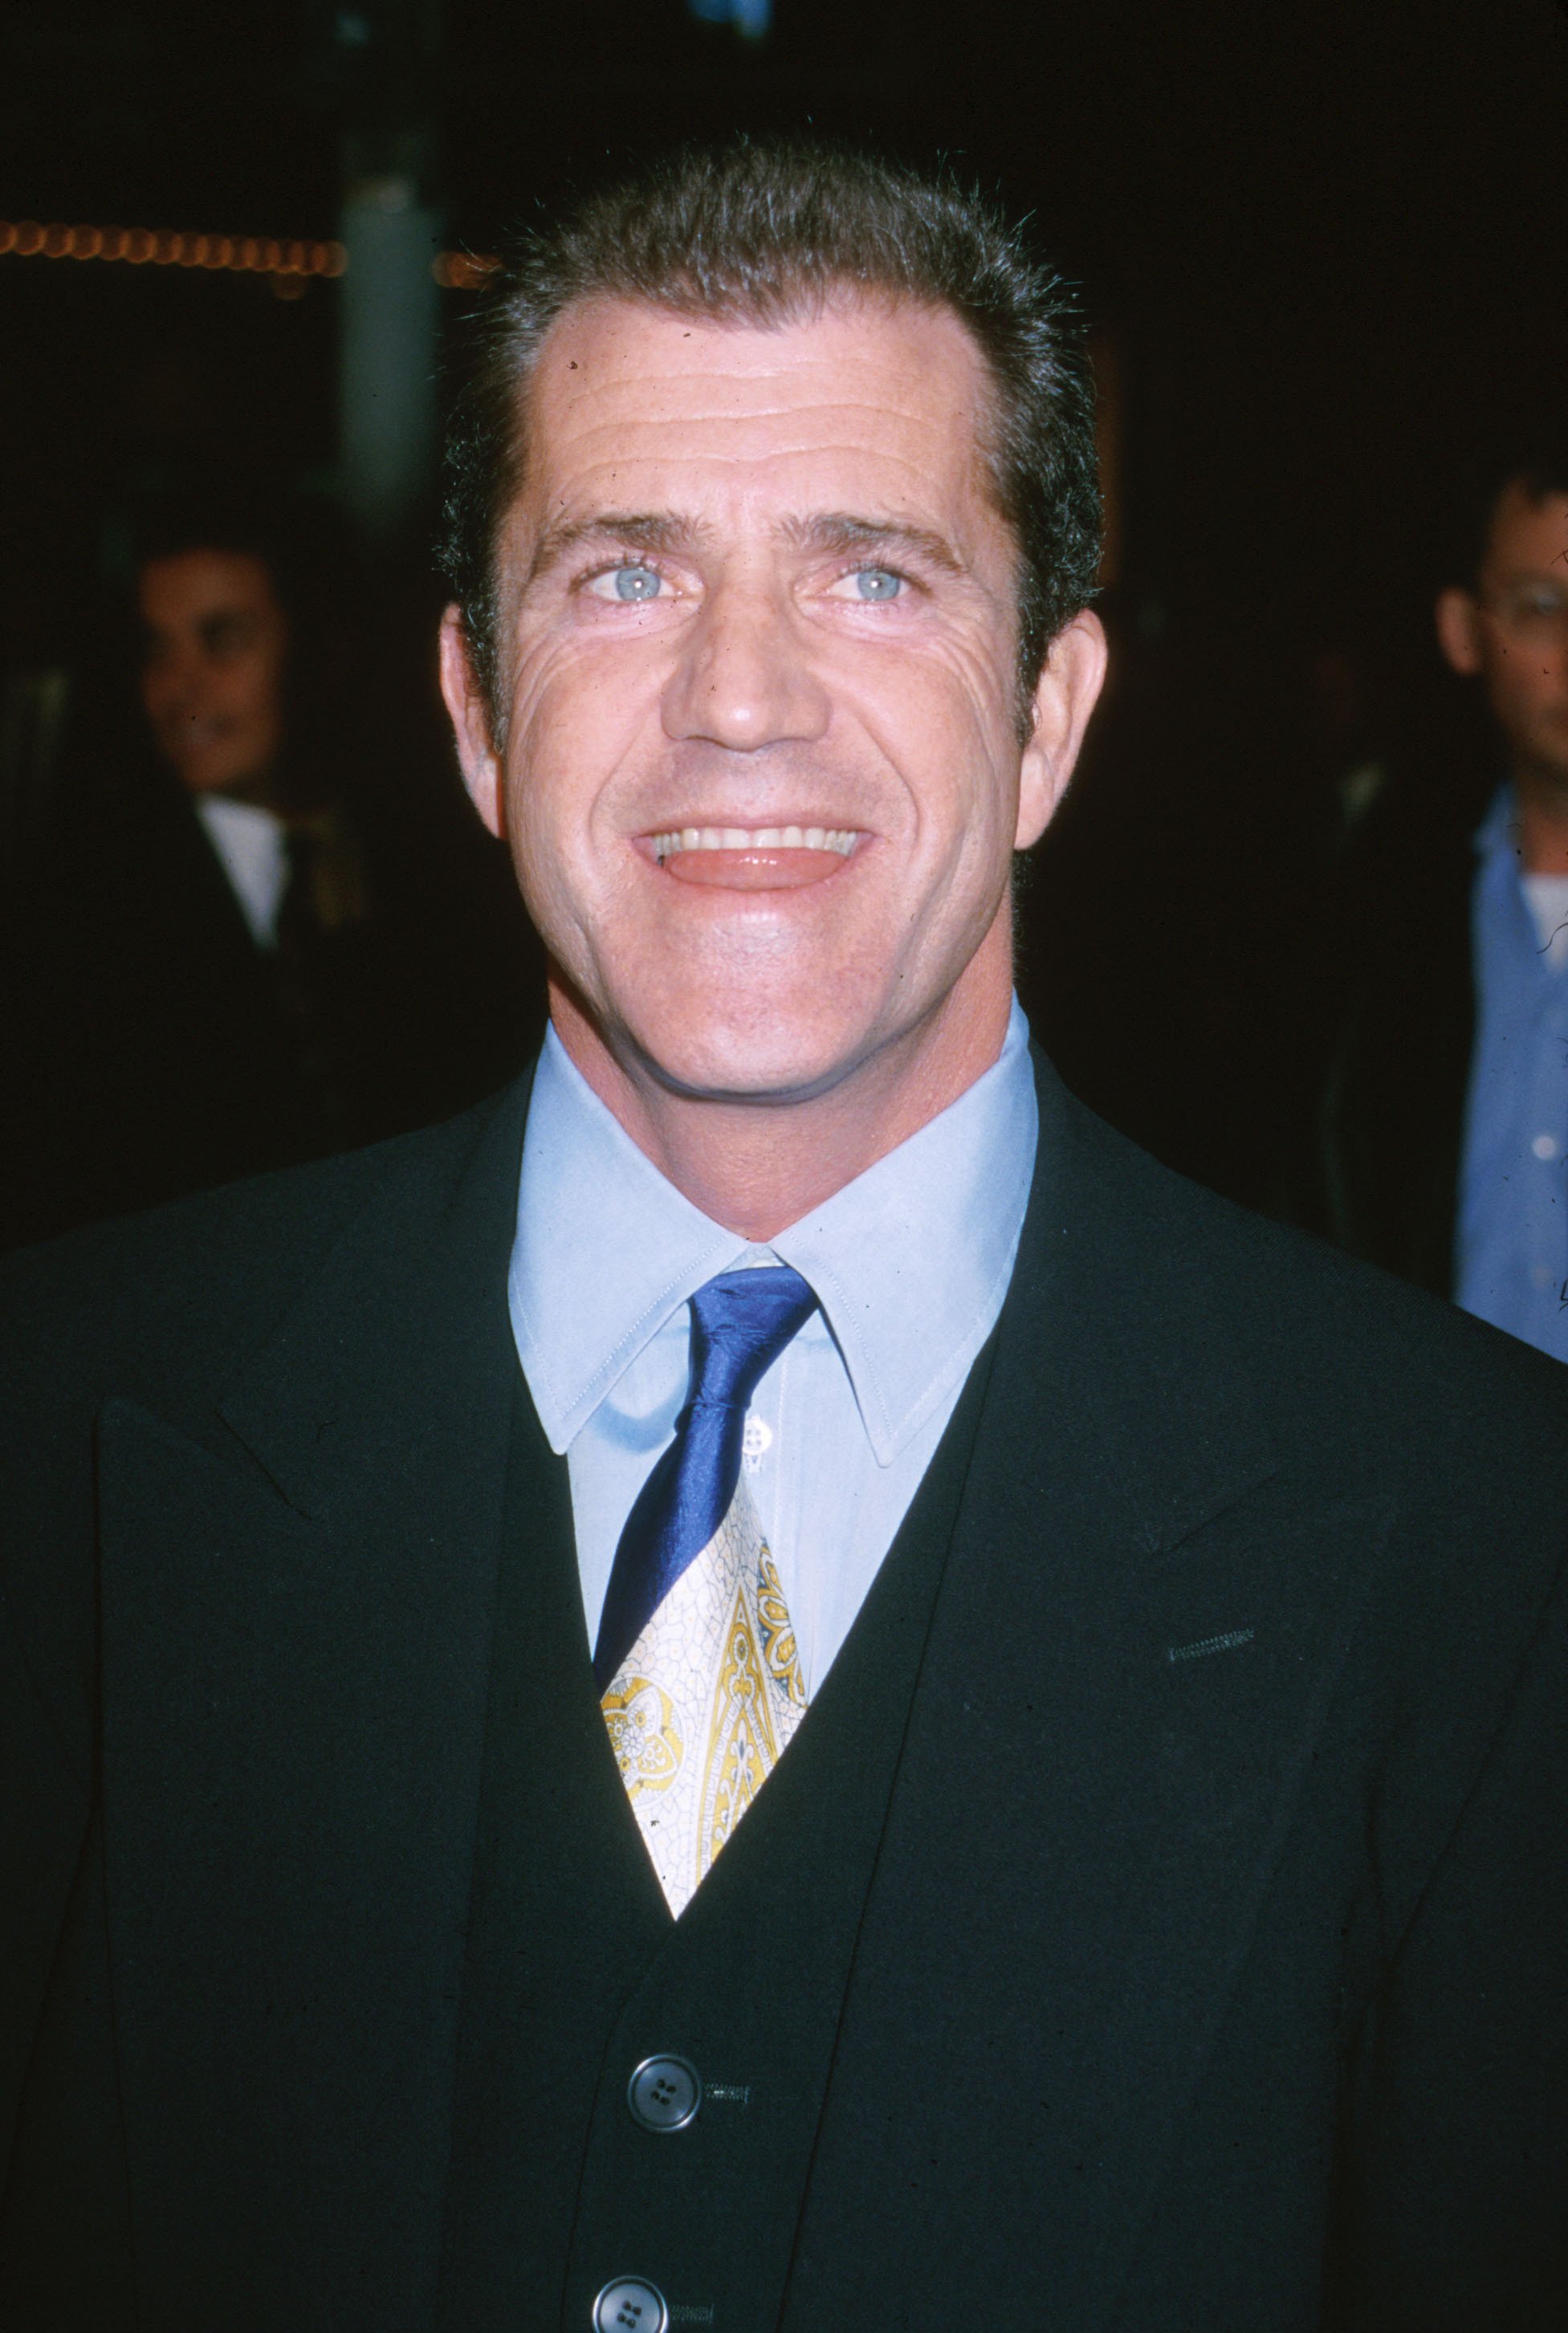 Mel Gibson at the "What Women Want" Los Angeles premiere at Mann Village Theatre in Westwood, California on December 13, 2000 | Source: Getty Images